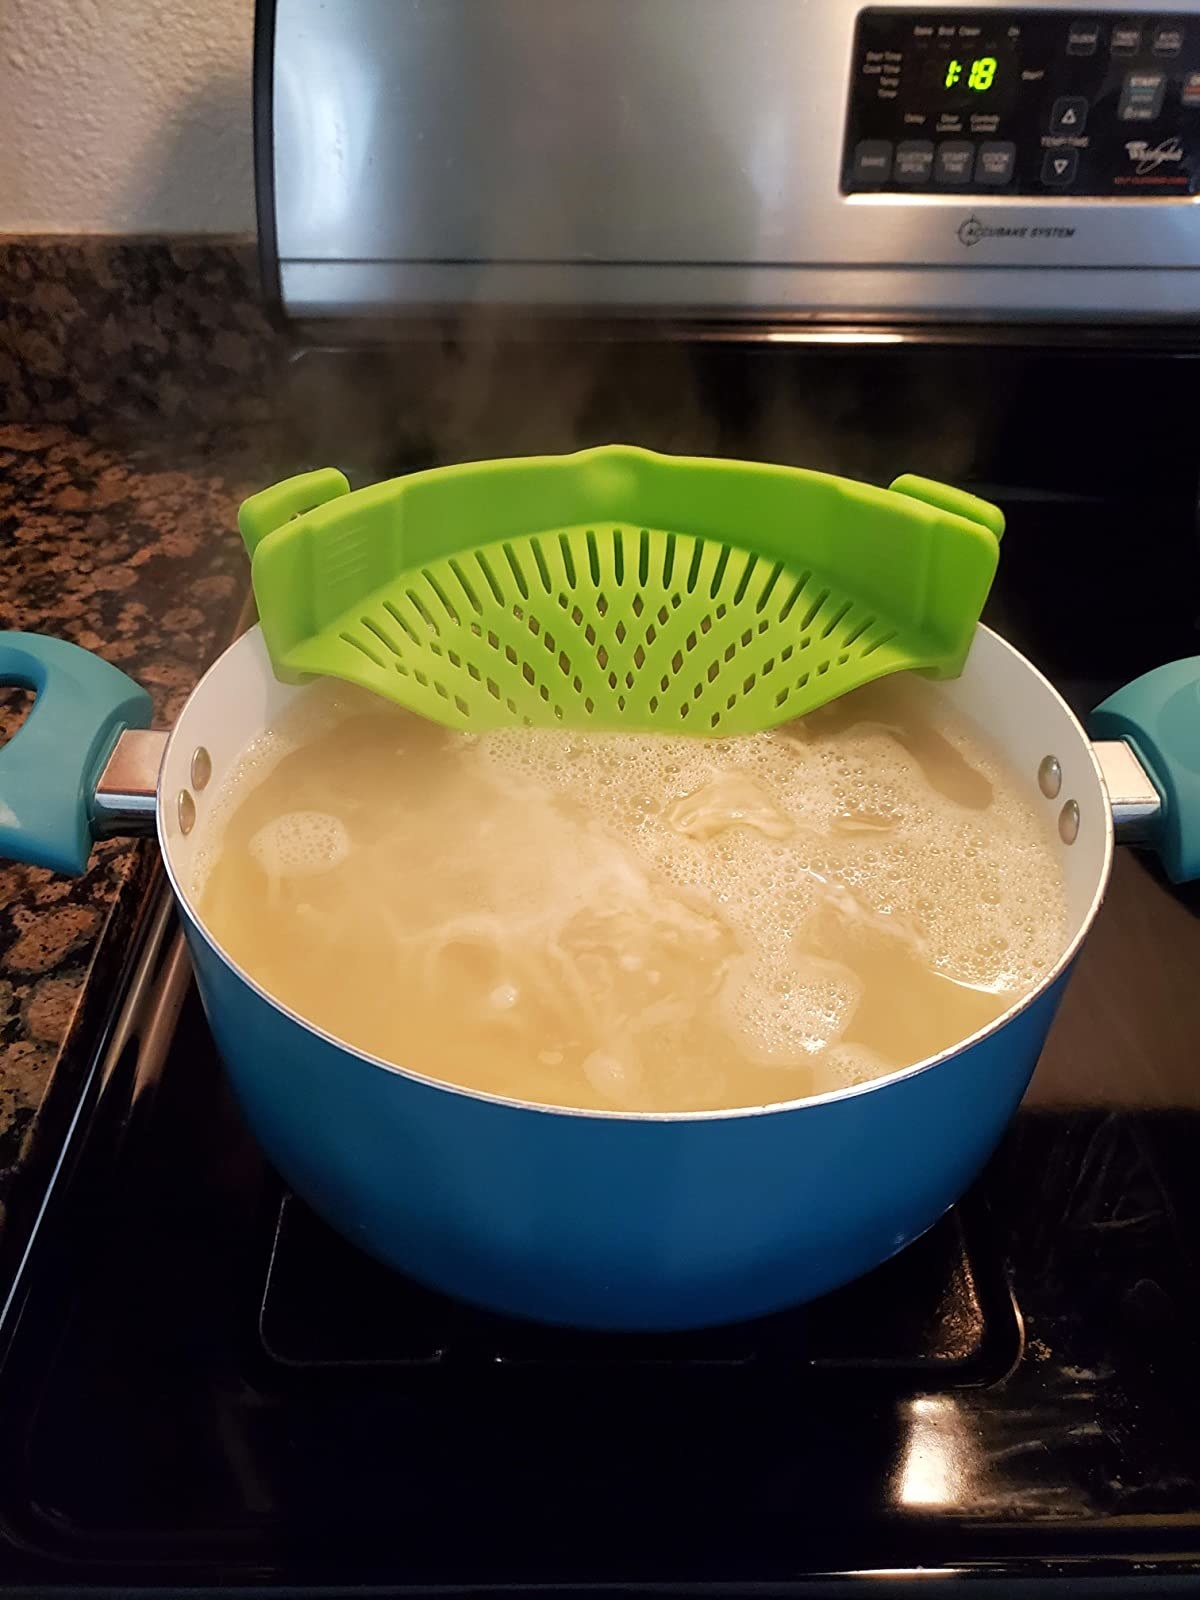 Reviewer photo of the green strainer attached to a pot full of water and pasta